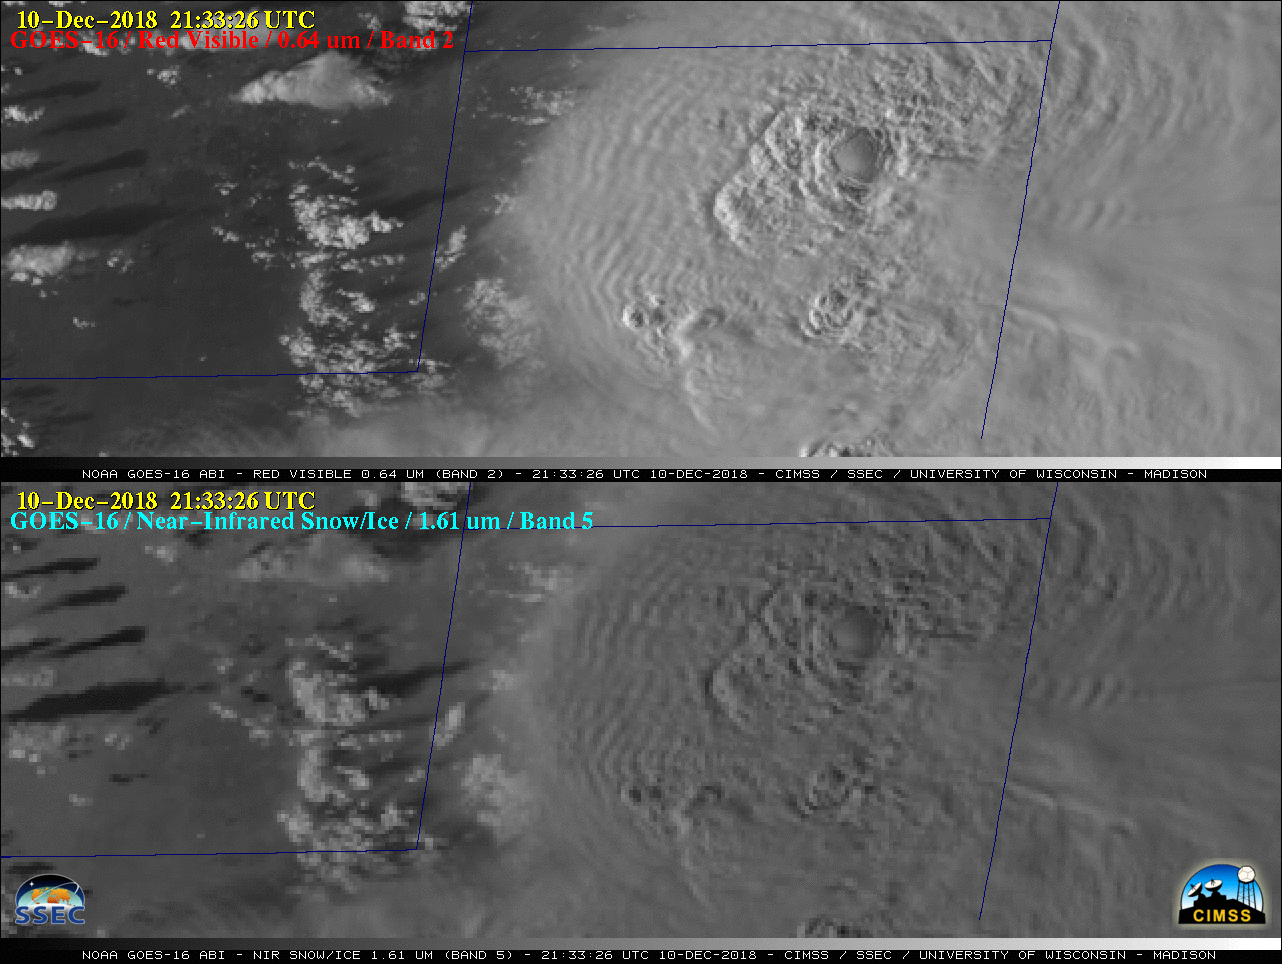 GOES-16 "Red" Visible (0.64 µm, top) and Near-Infrared "Snow/Ice" (1.61 µm, bottom) images [click to play MP4 animation]